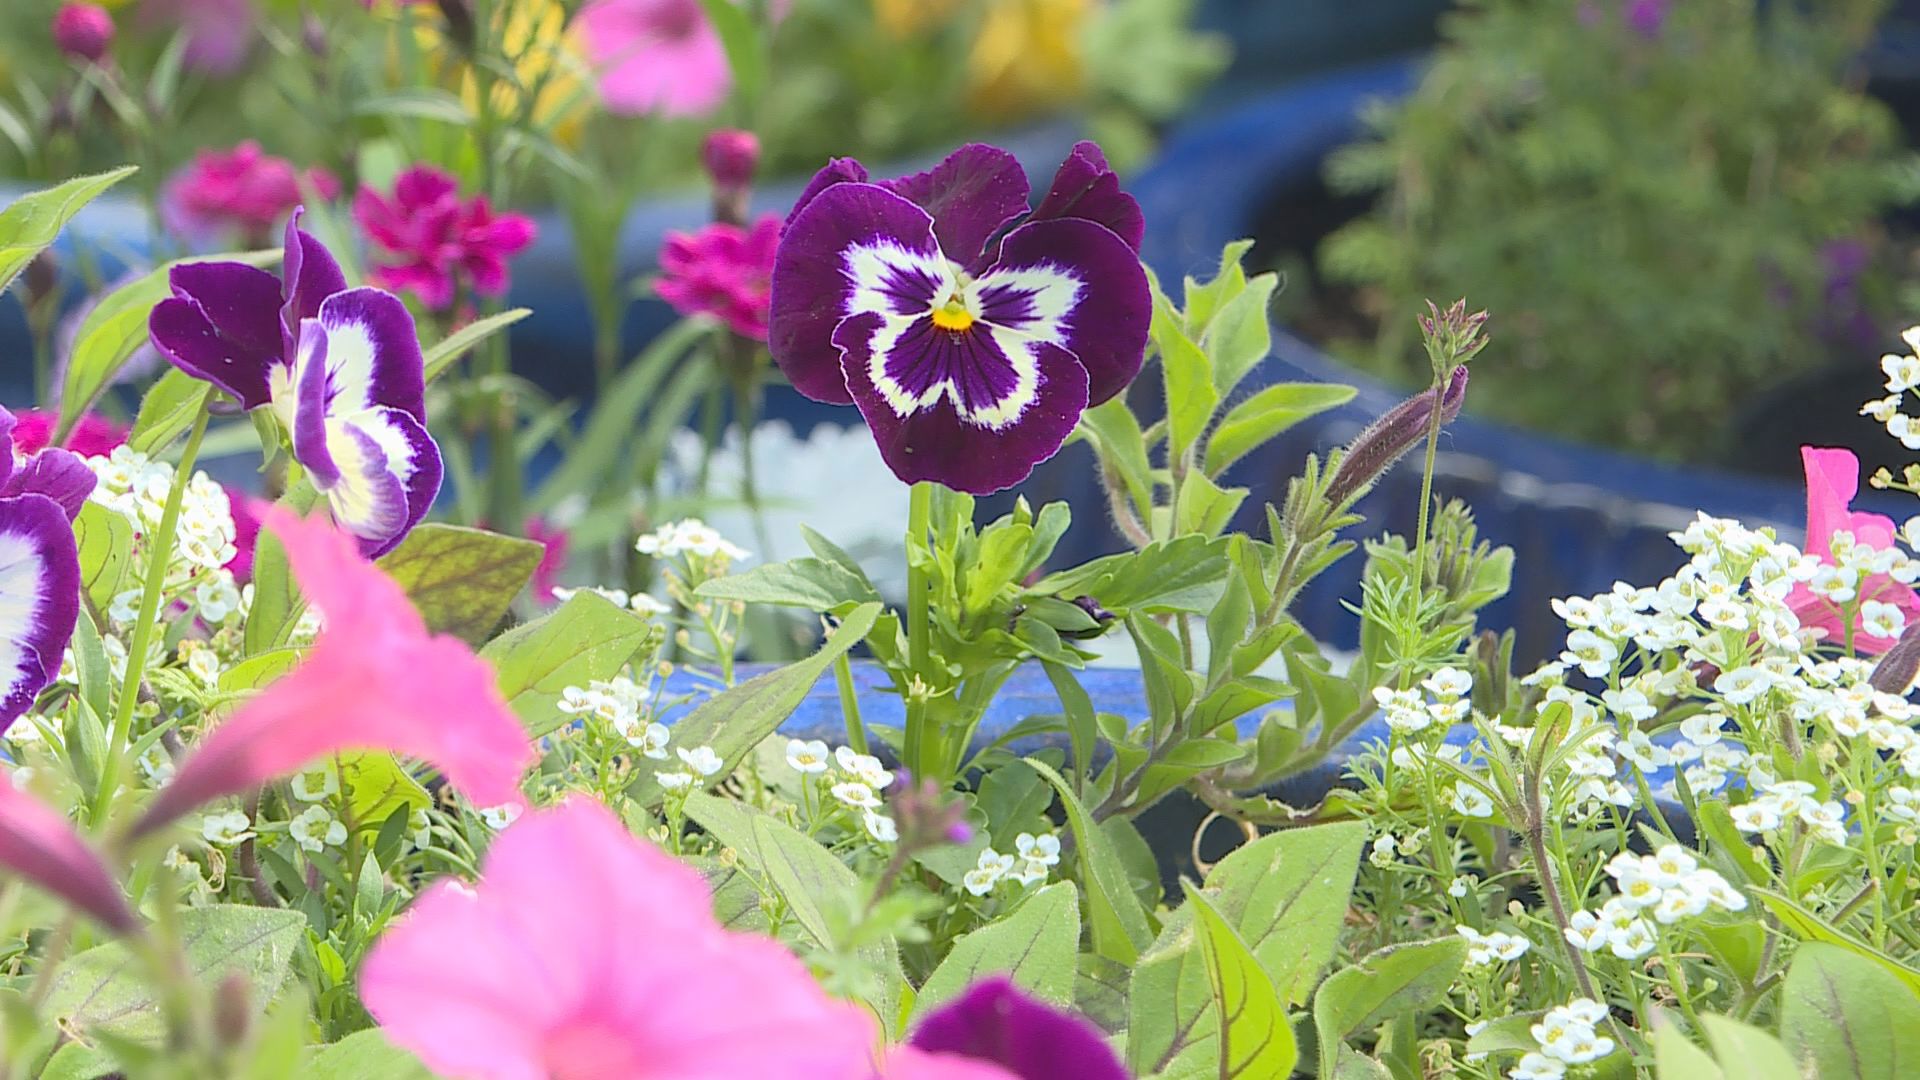 Planting is well underway in the garden. Here are some tasks you need to be doing now.